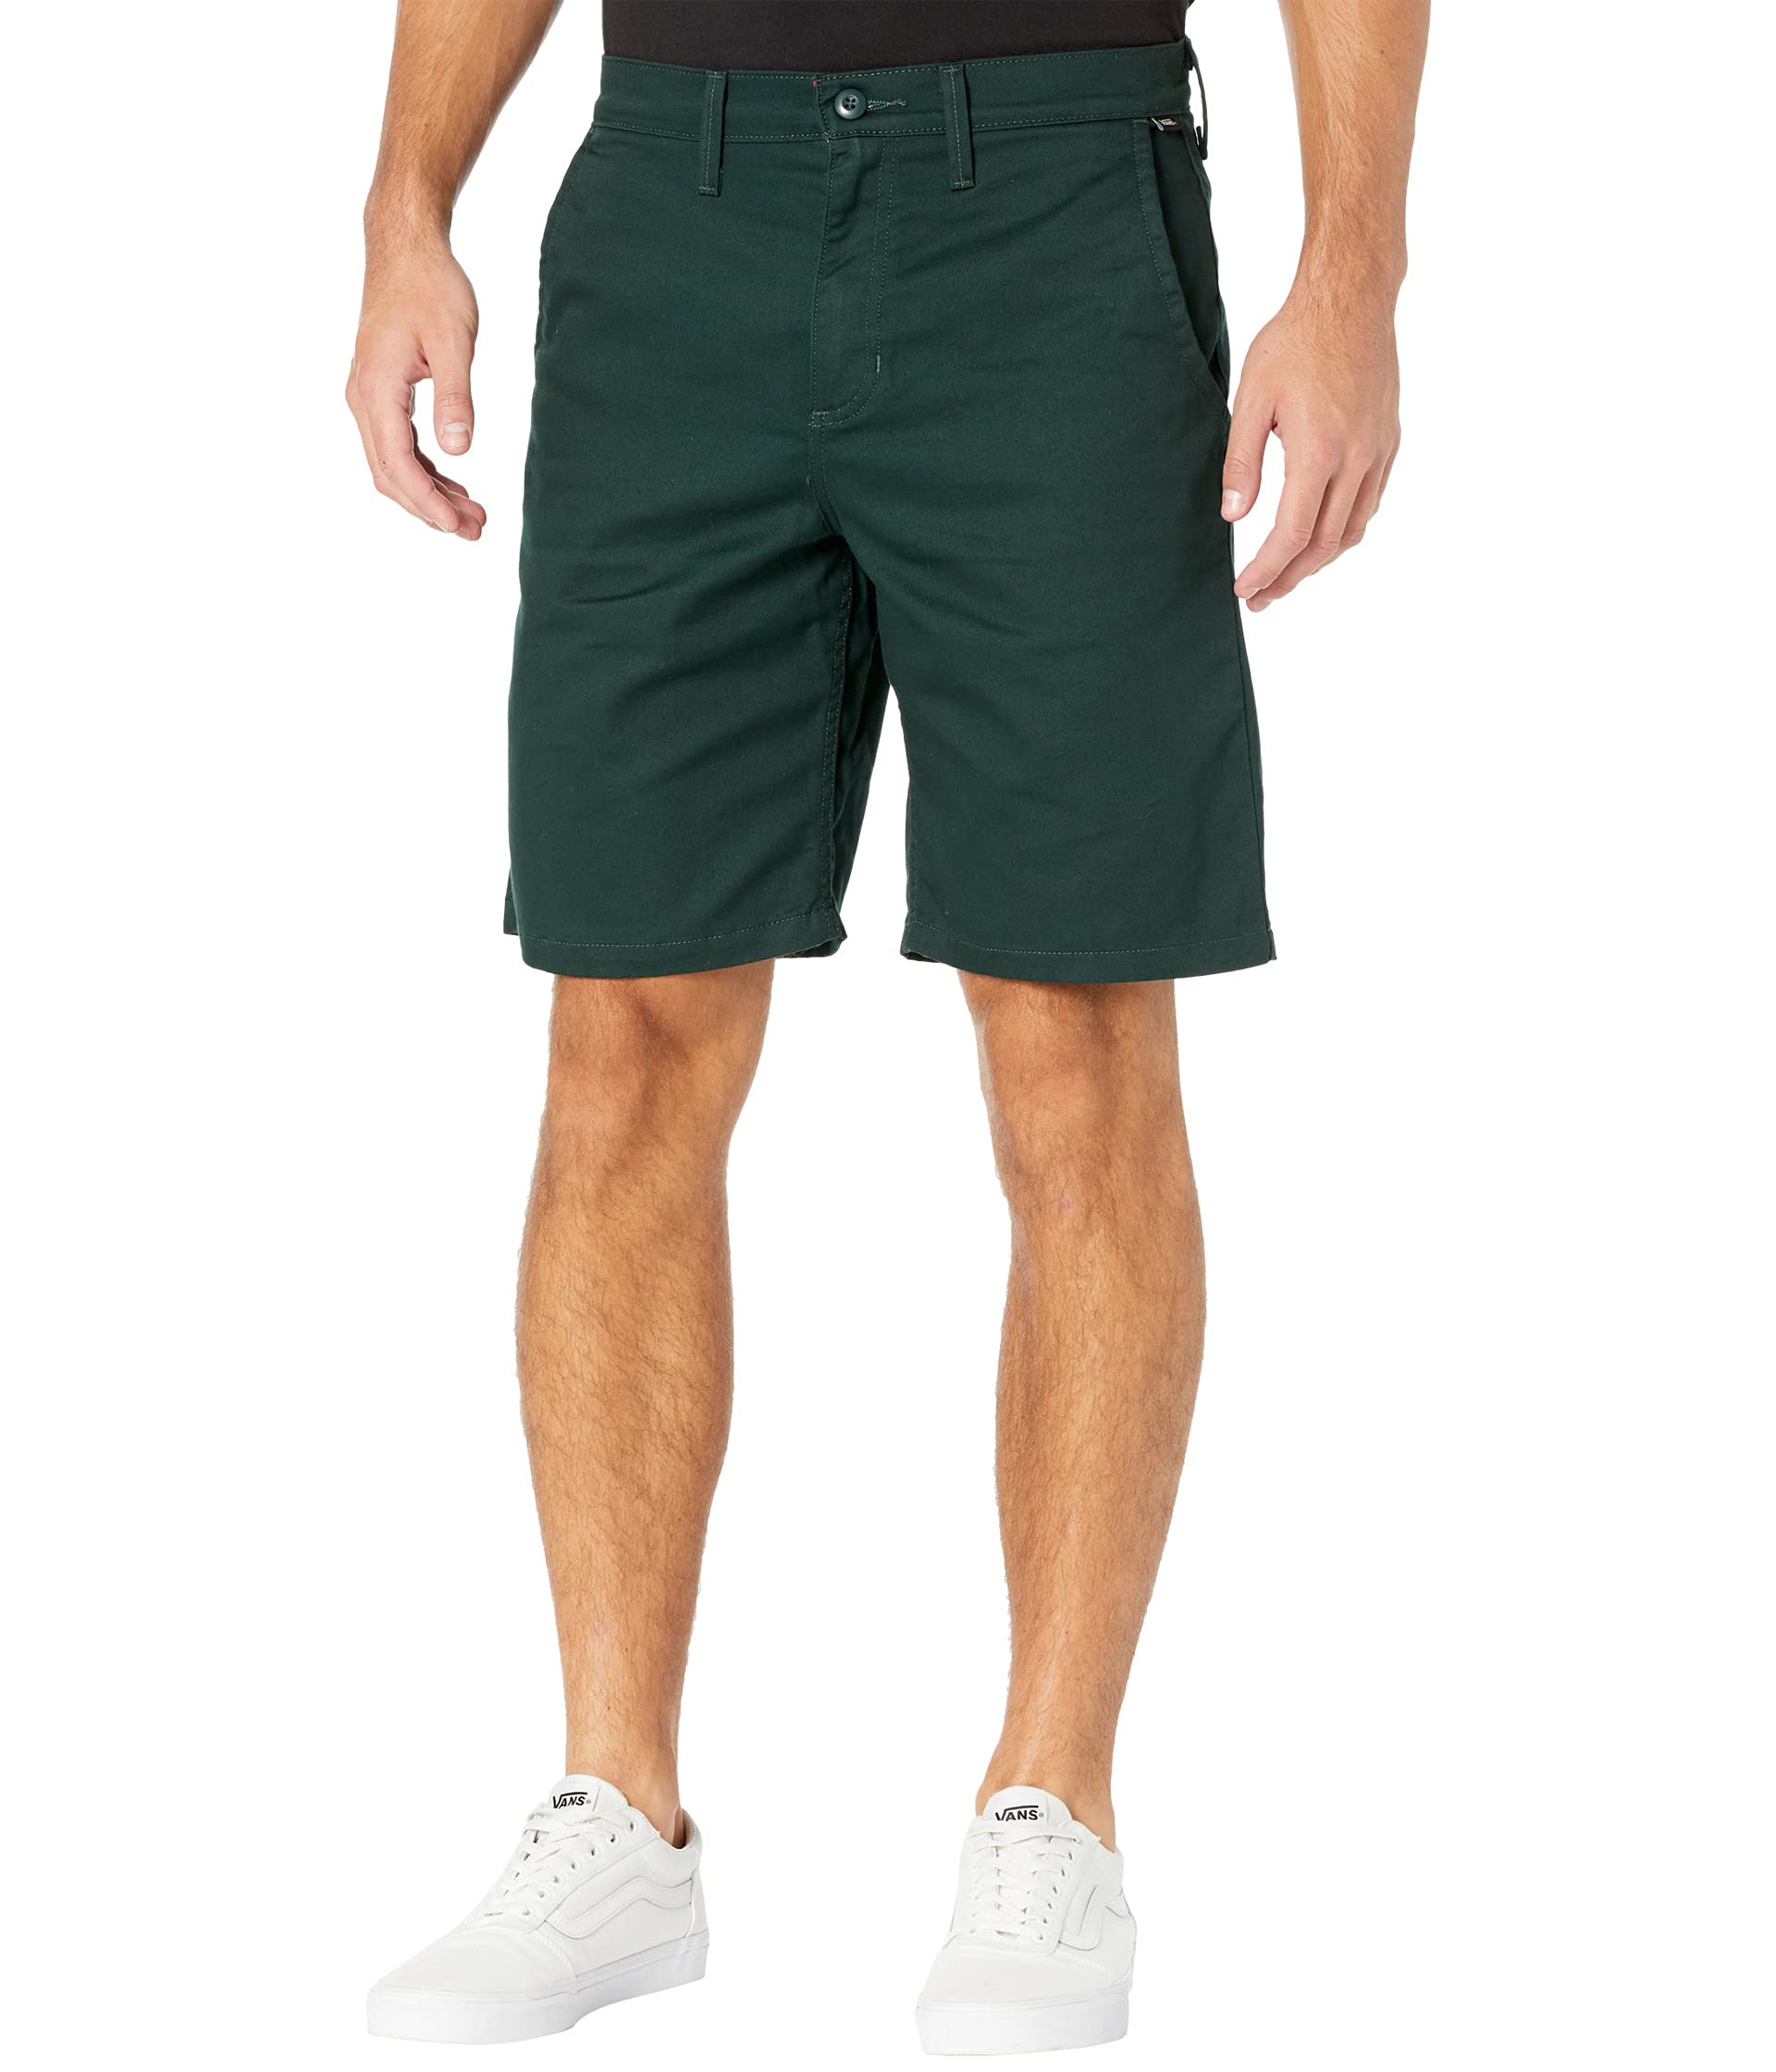 Шорты Vans, Authentic Chino Relaxed Shorts шорты authentic relaxed vans цвет dirt